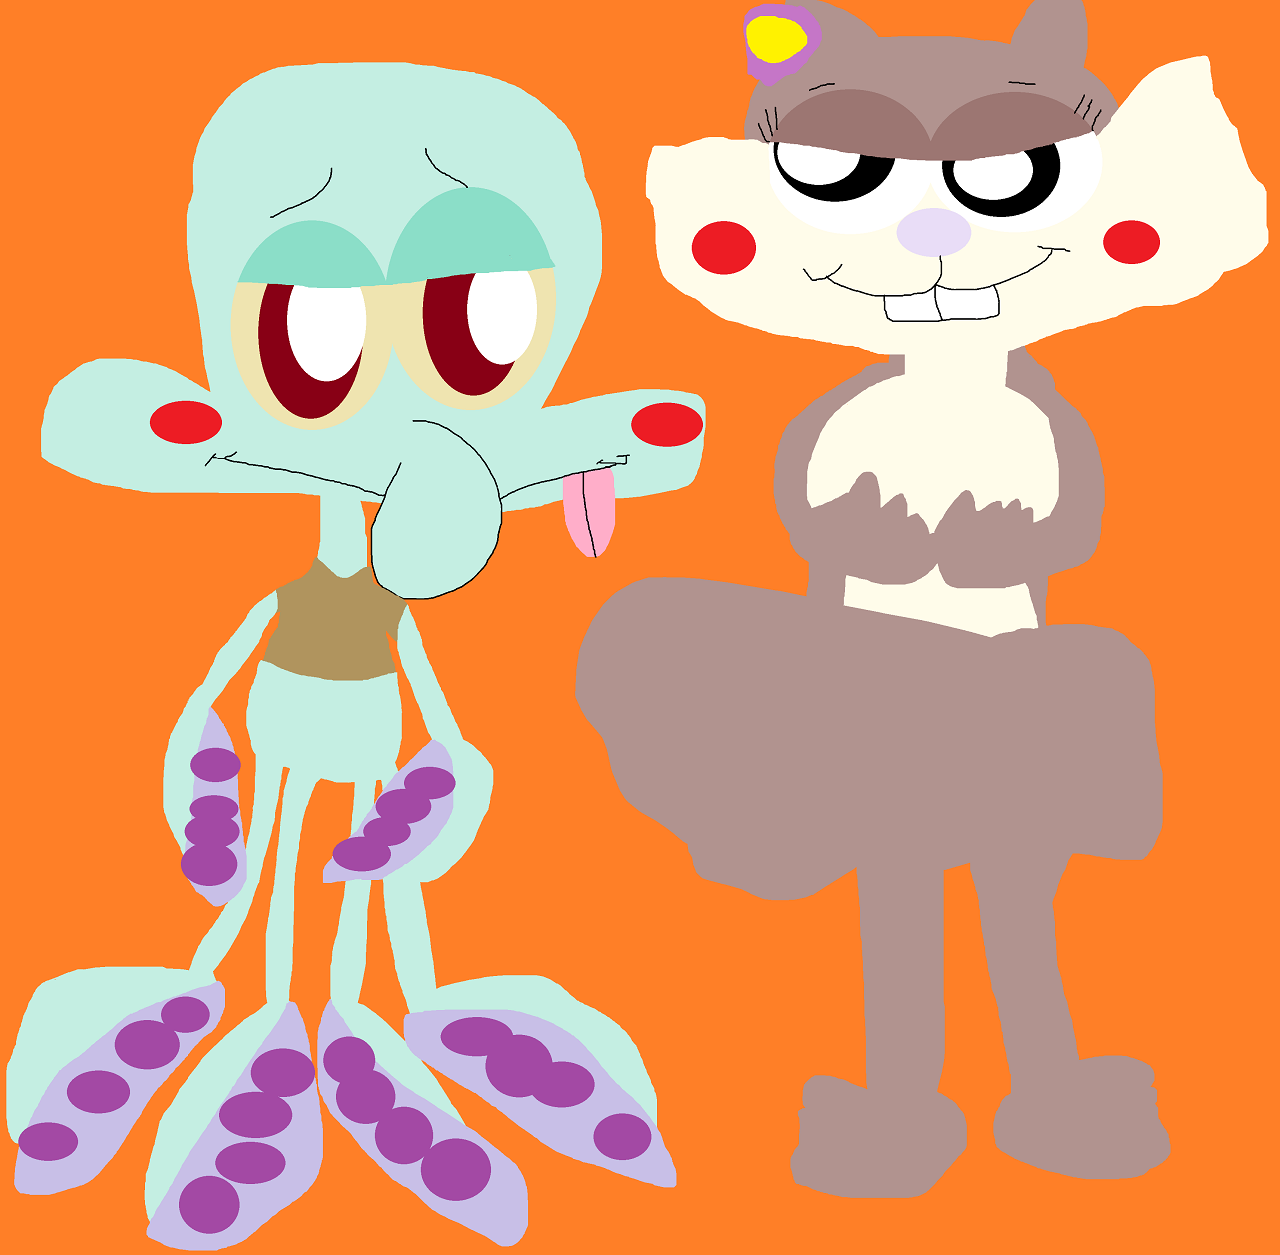 Squidward Likes Sandy's Little Cover Up by Falconlobo